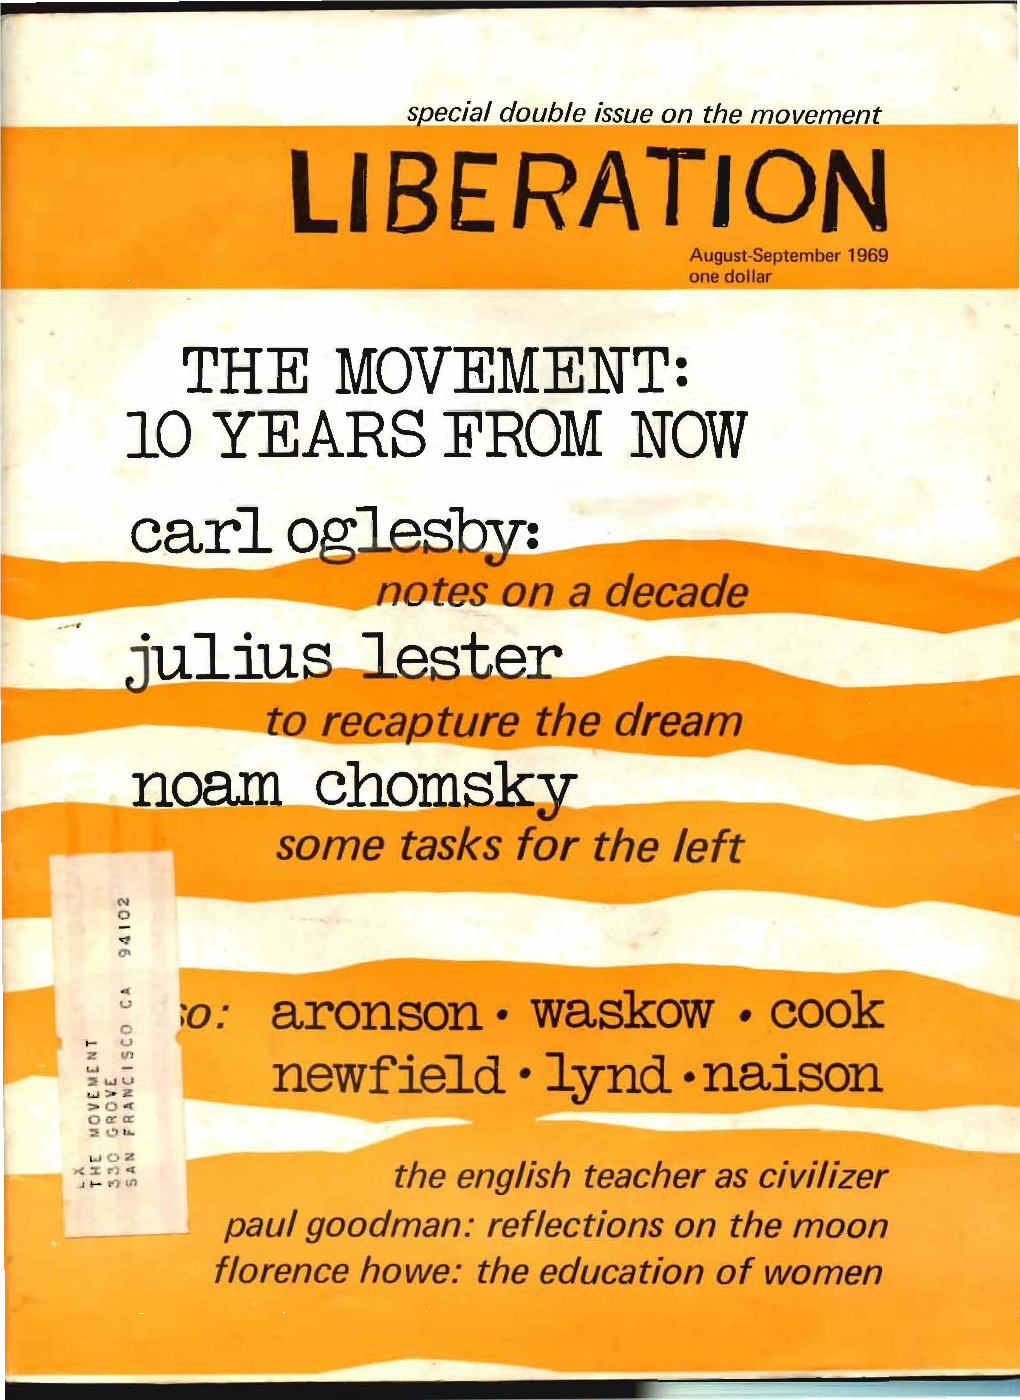 LIBERATION August-September 1969 One Dollar the MOVEMENT: 10 YEARS from NOW